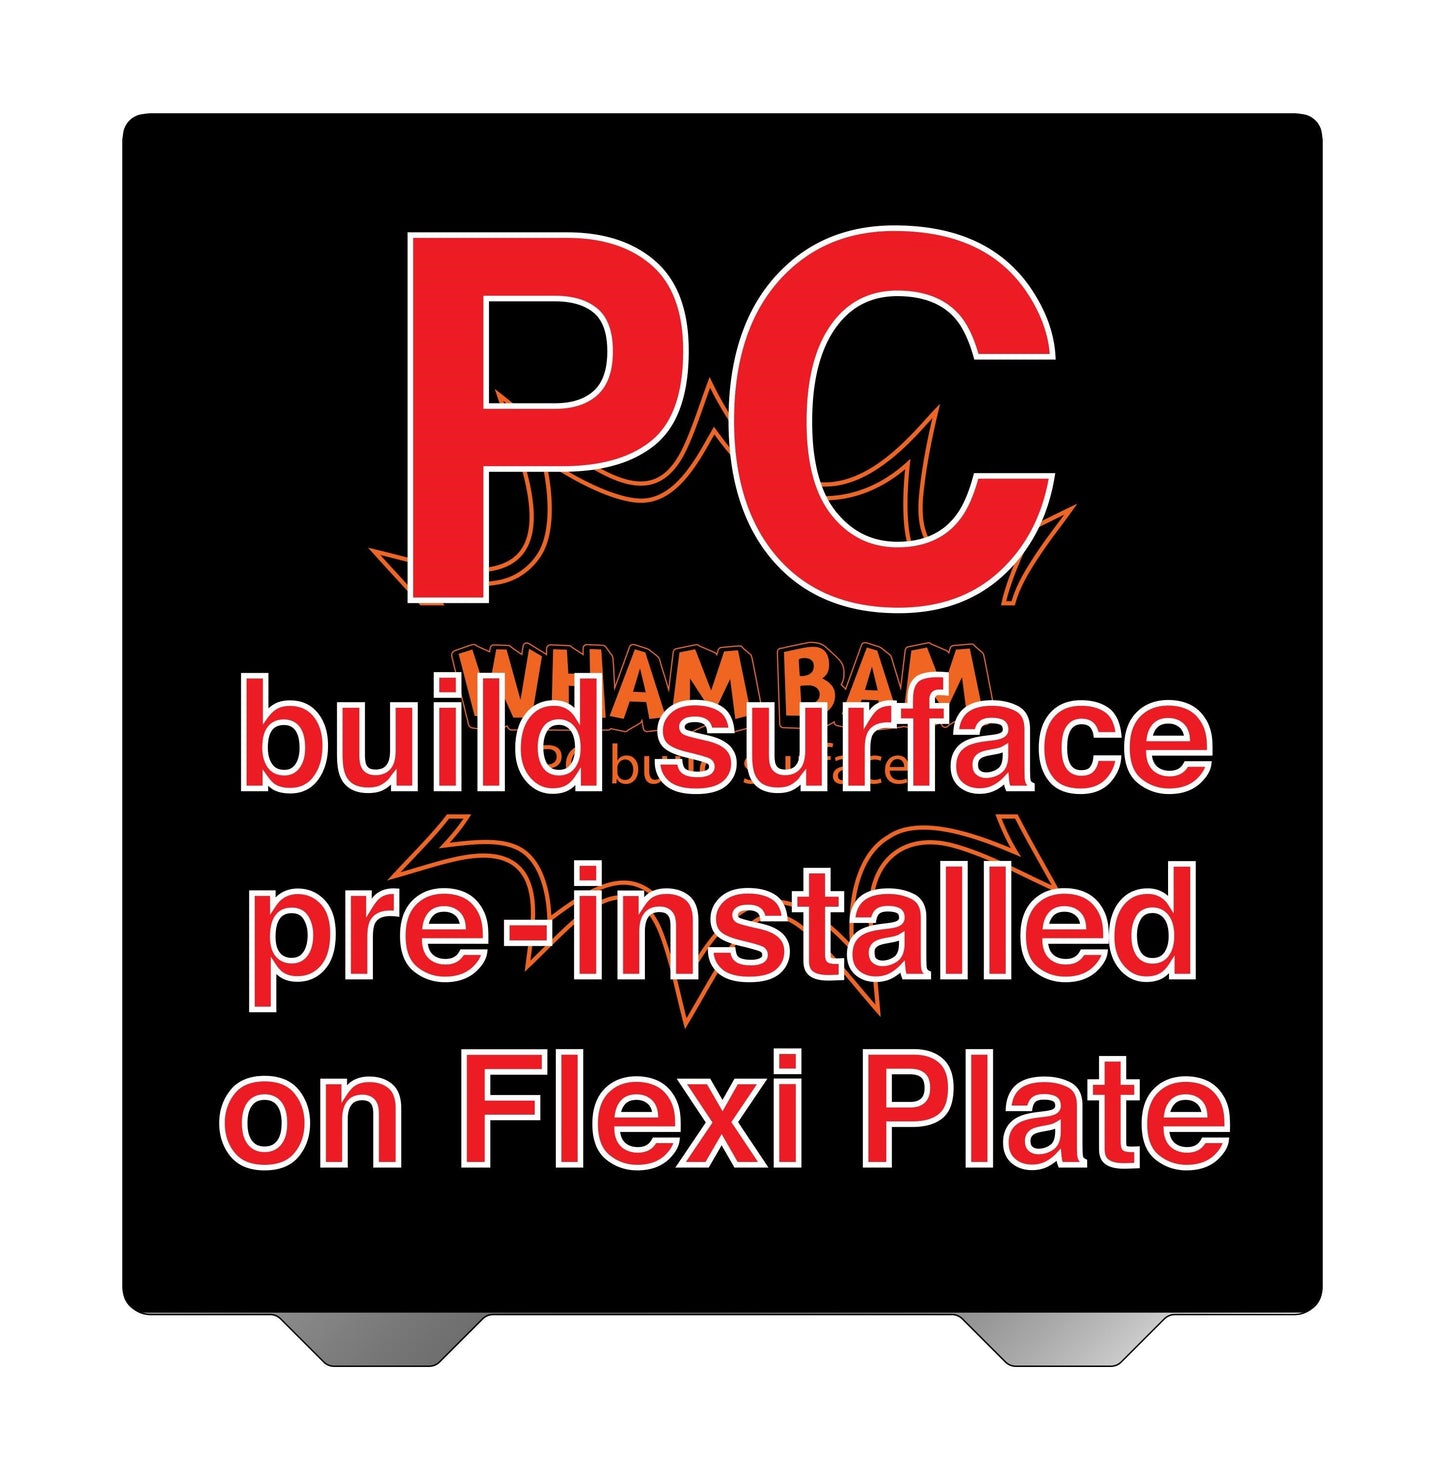 Flexi Plate with Pre-Installed PC Build Surface (Classic Black) - 320 x 310 - Creality CR-10S Pro, CR-10S Pro V2 & V3, CR-X